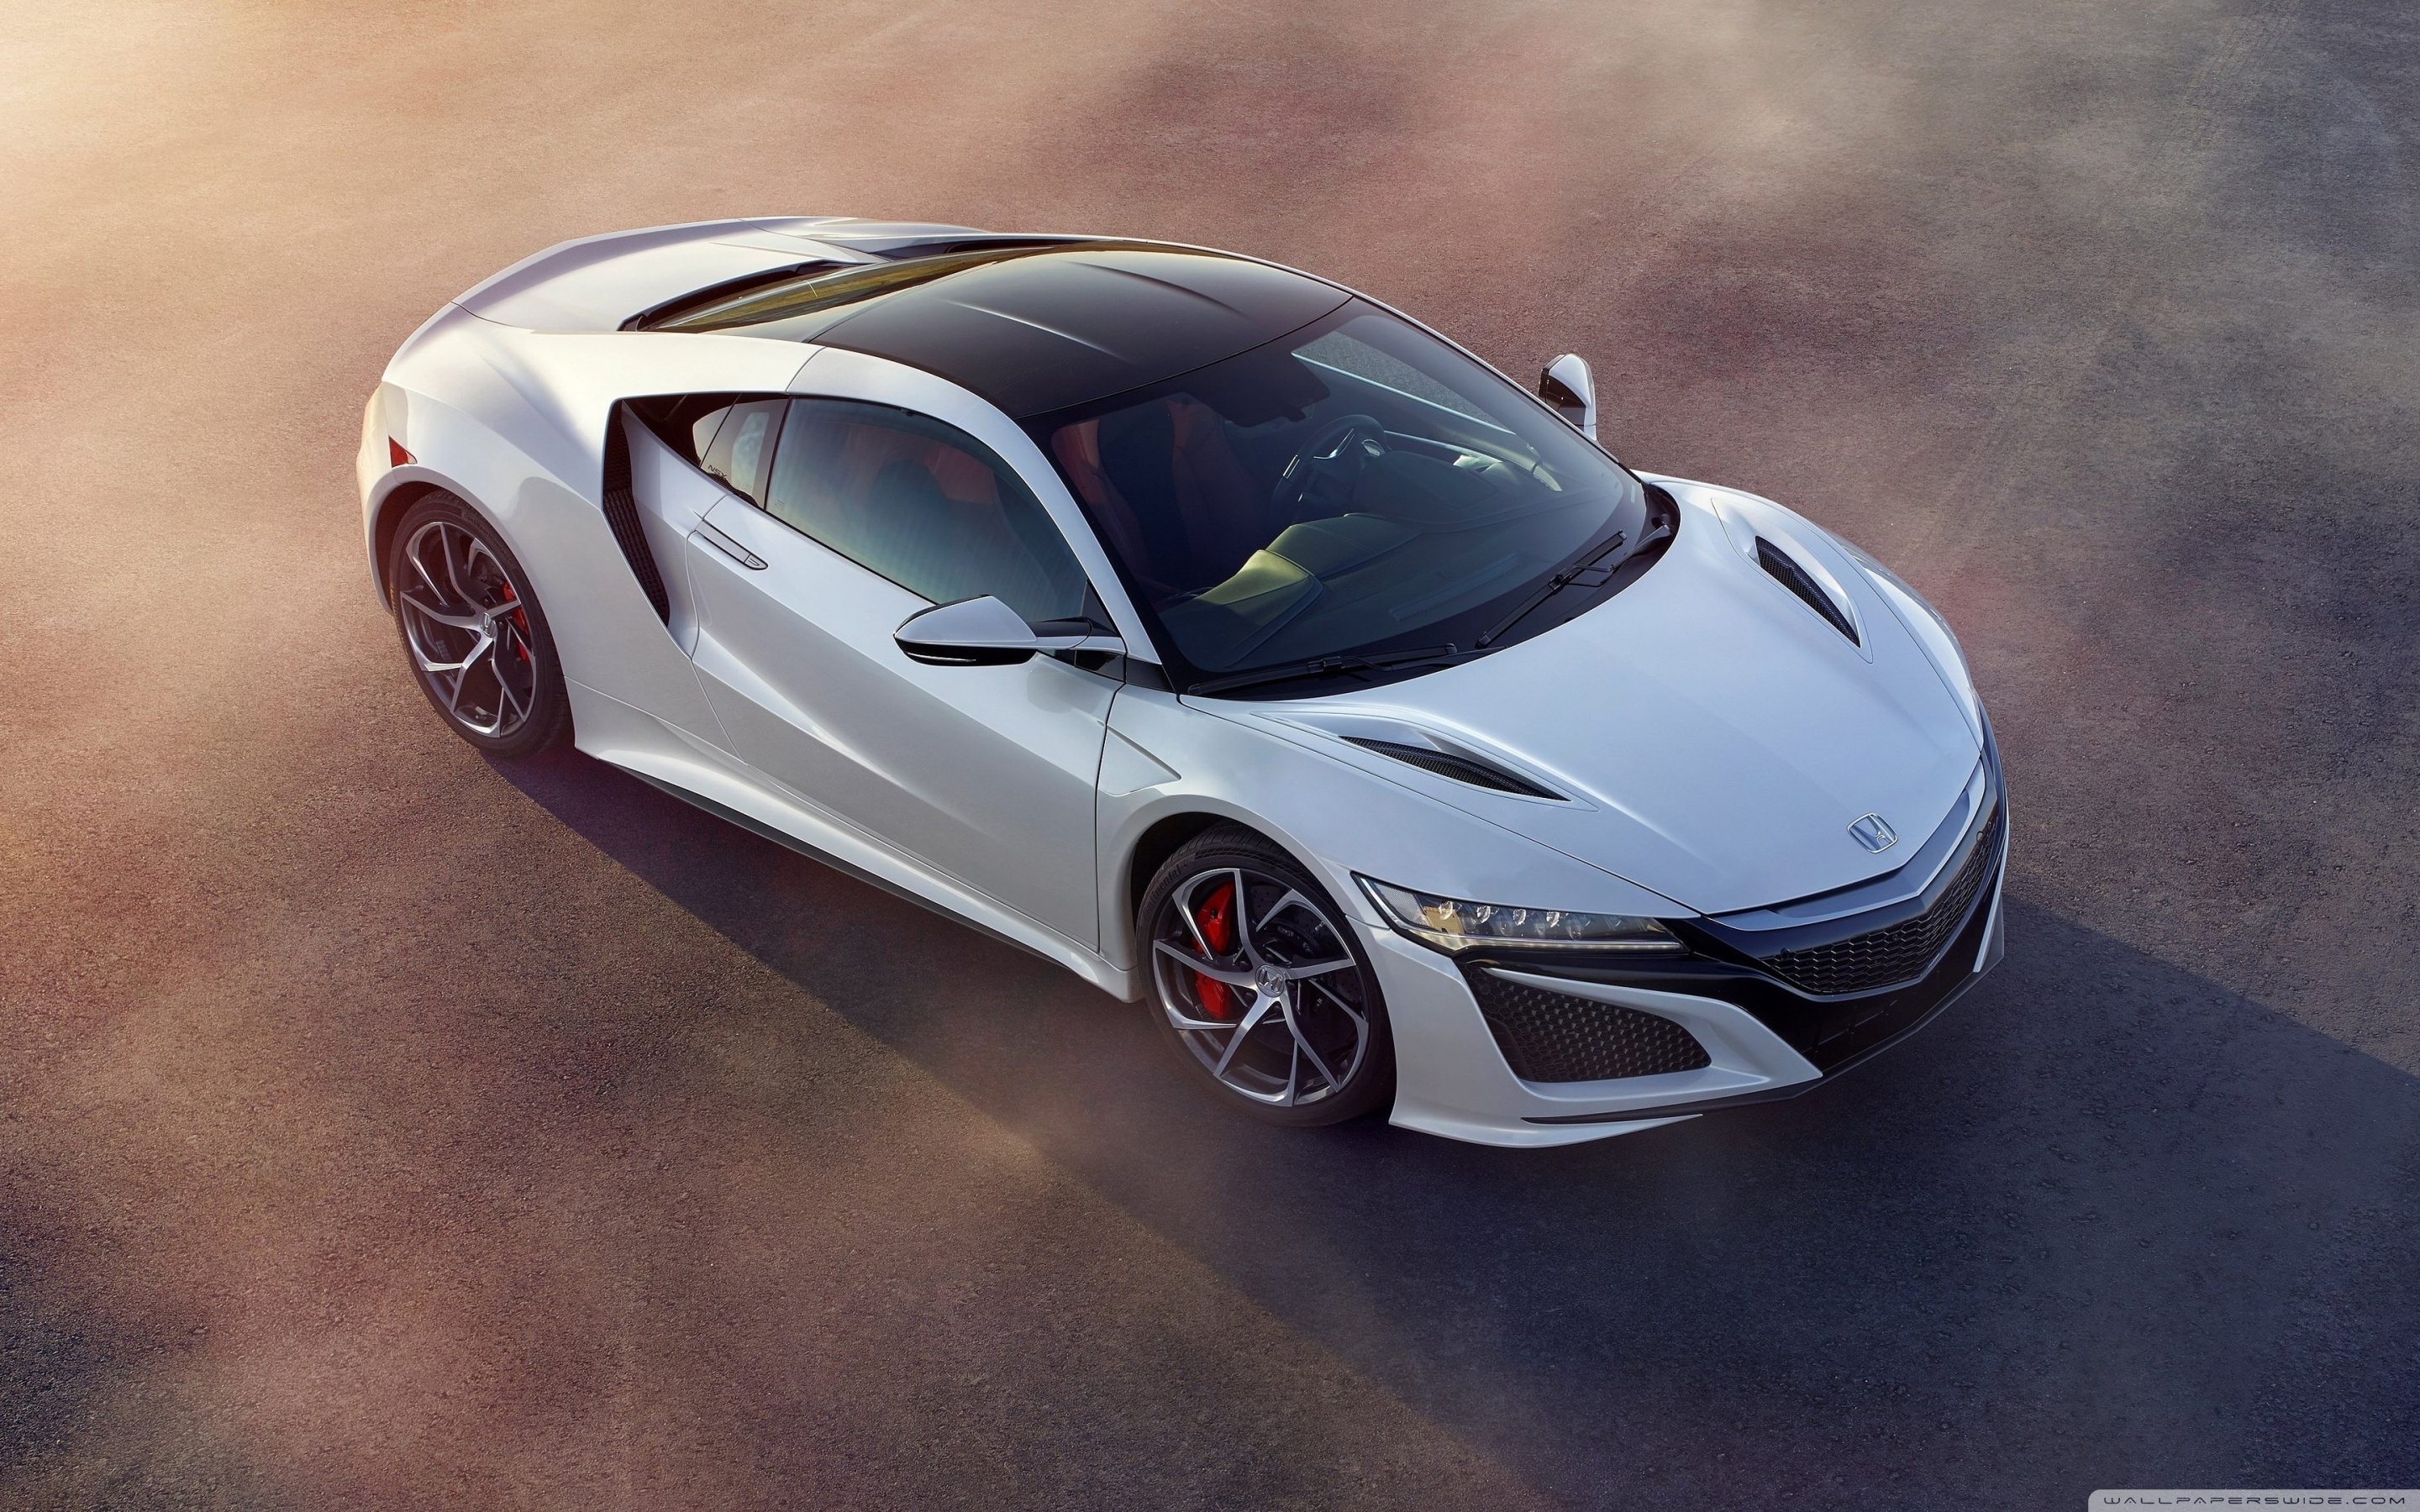 Acura NSX Coupe White Car Ultra HD Desktop Background Wallpaper for 4K UHD  TV : Widescreen & UltraWide Desktop & Laptop : Multi Display, Dual Monitor  : Tablet : Smartphone